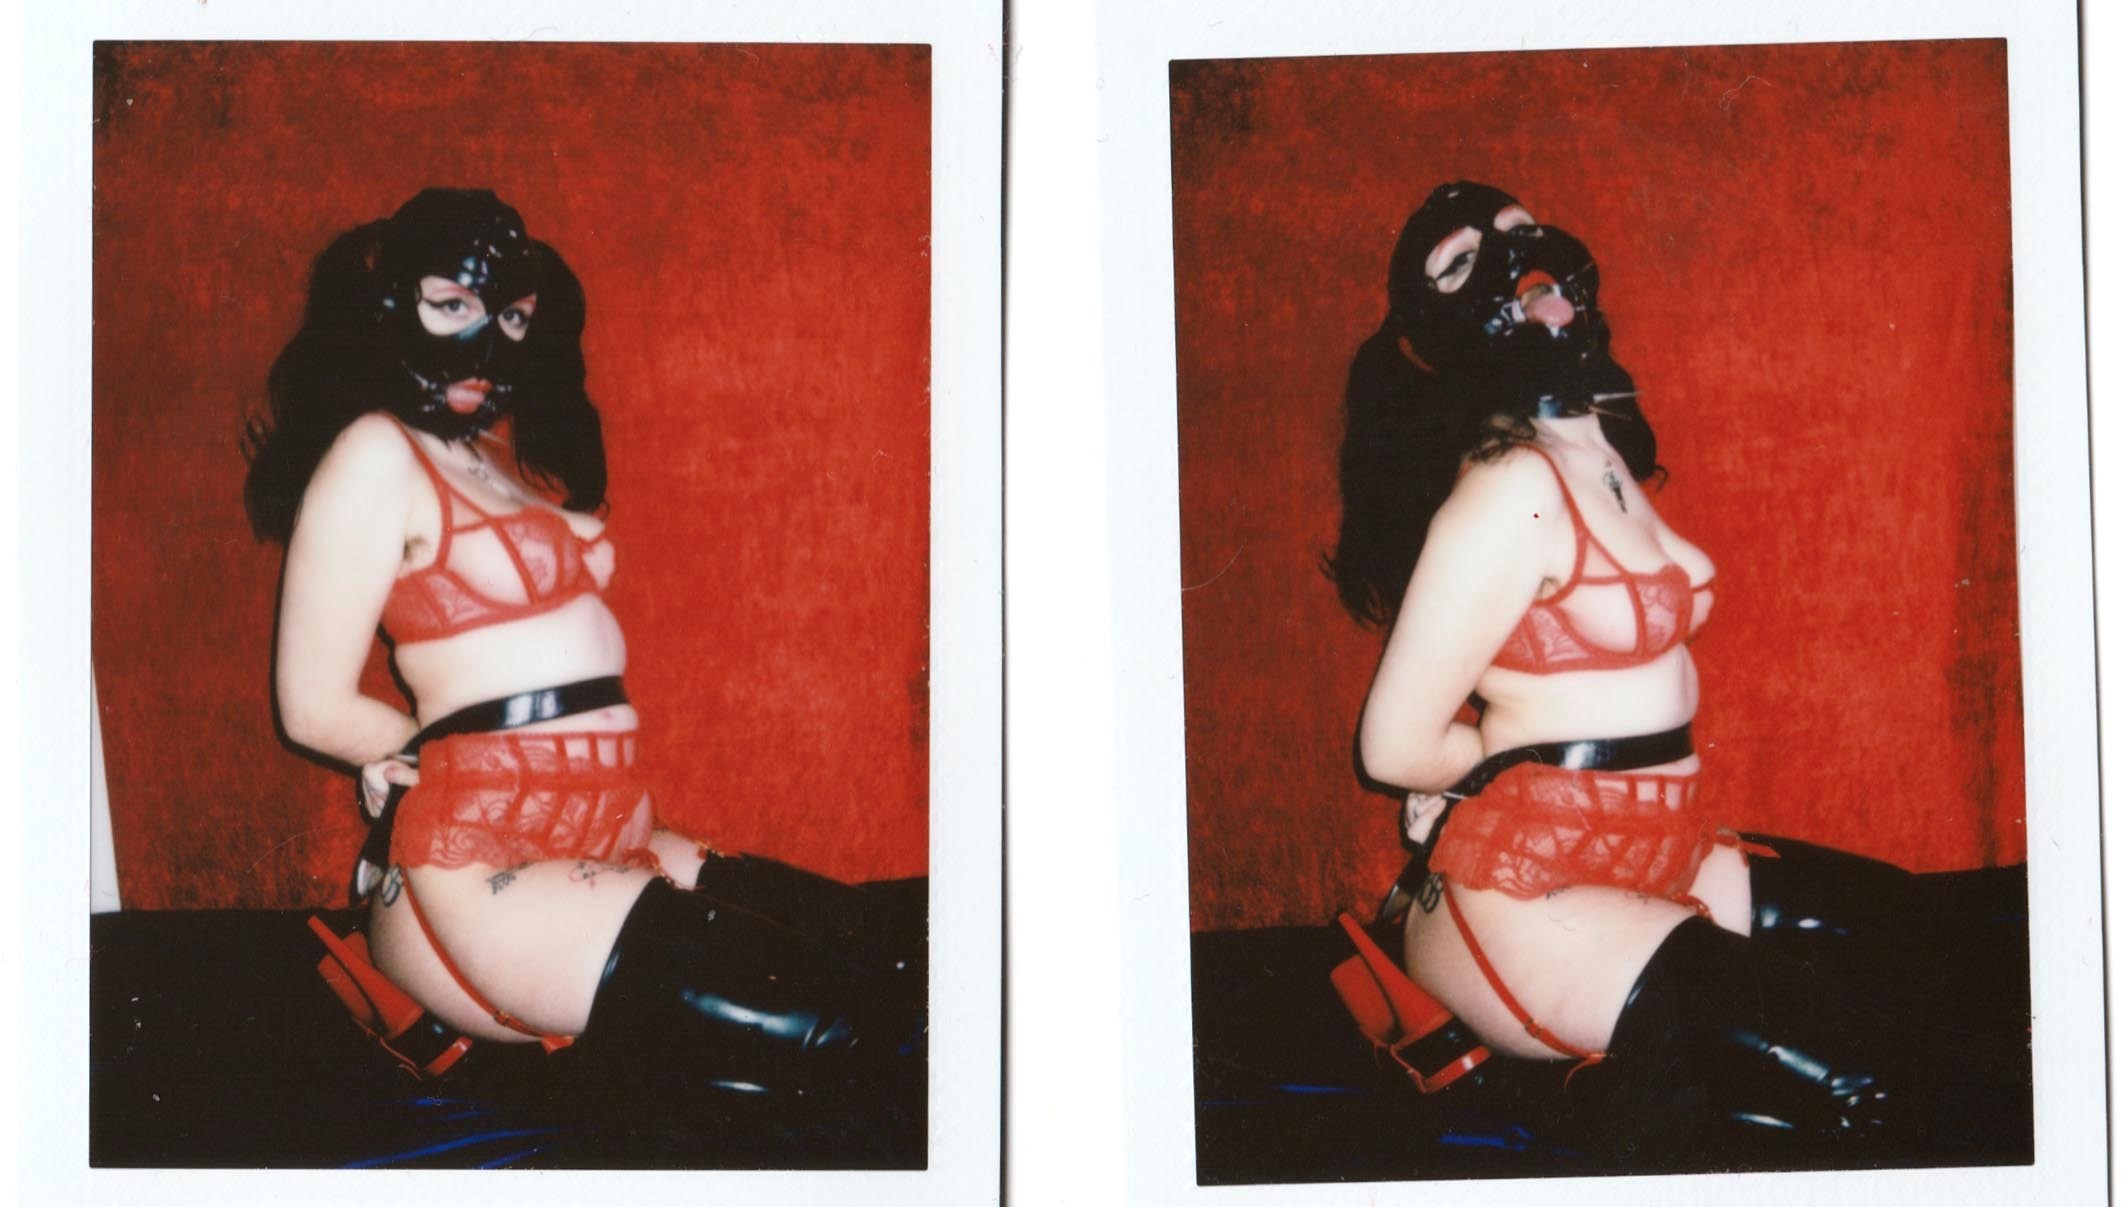 The photographers redefining the erotic image for the 21st century Dazed